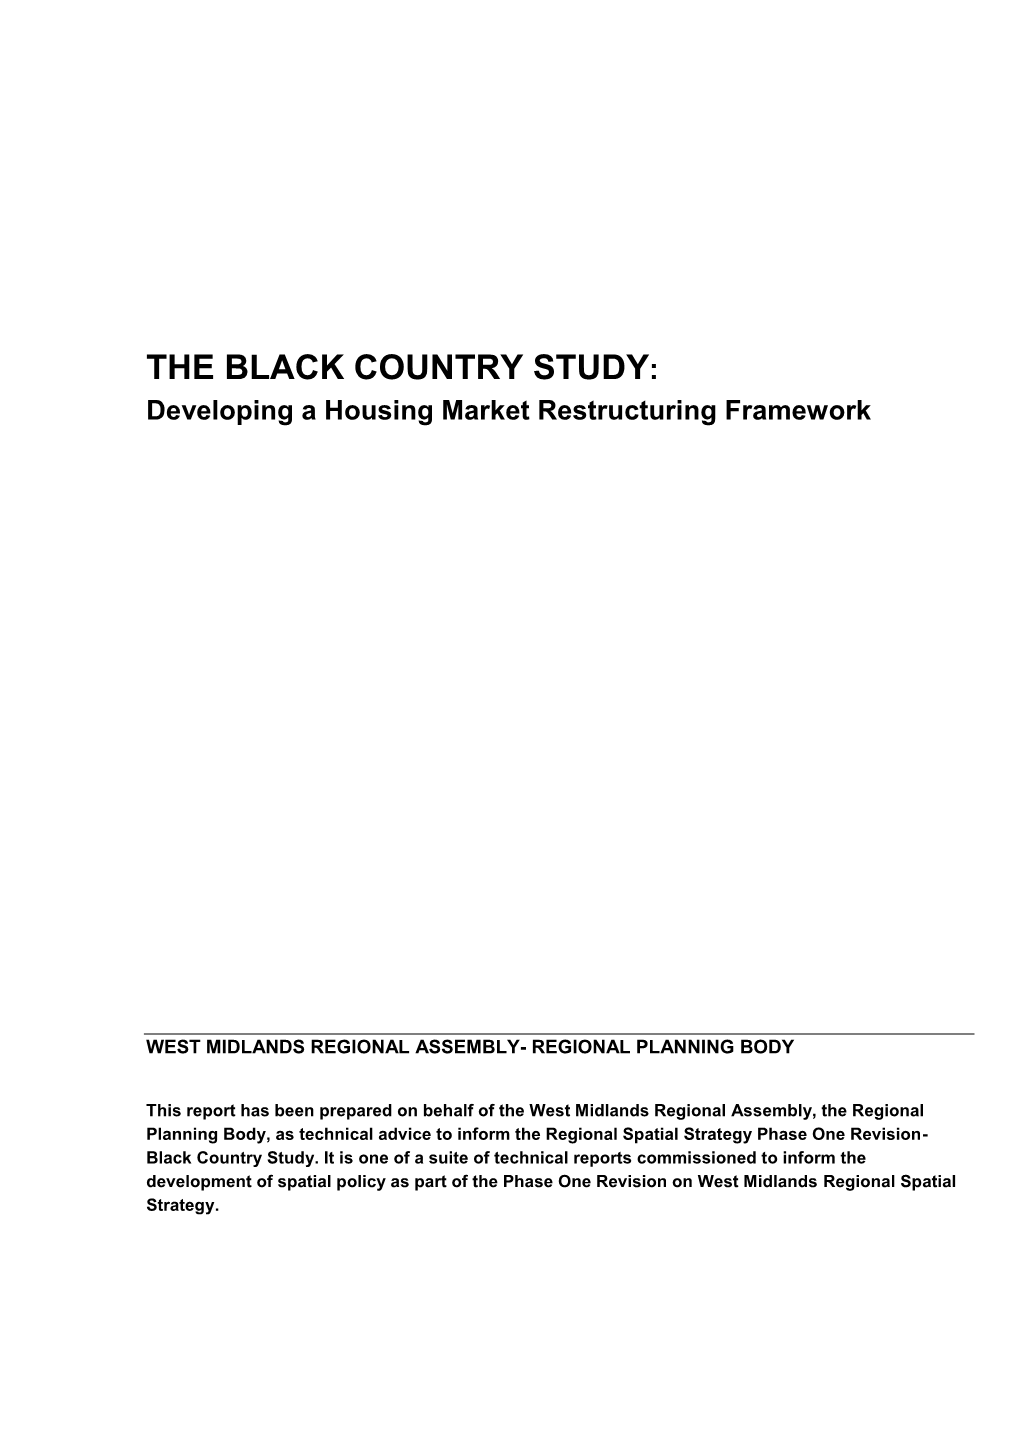 BLACK COUNTRY STUDY: Developing a Housing Market Restructuring Framework